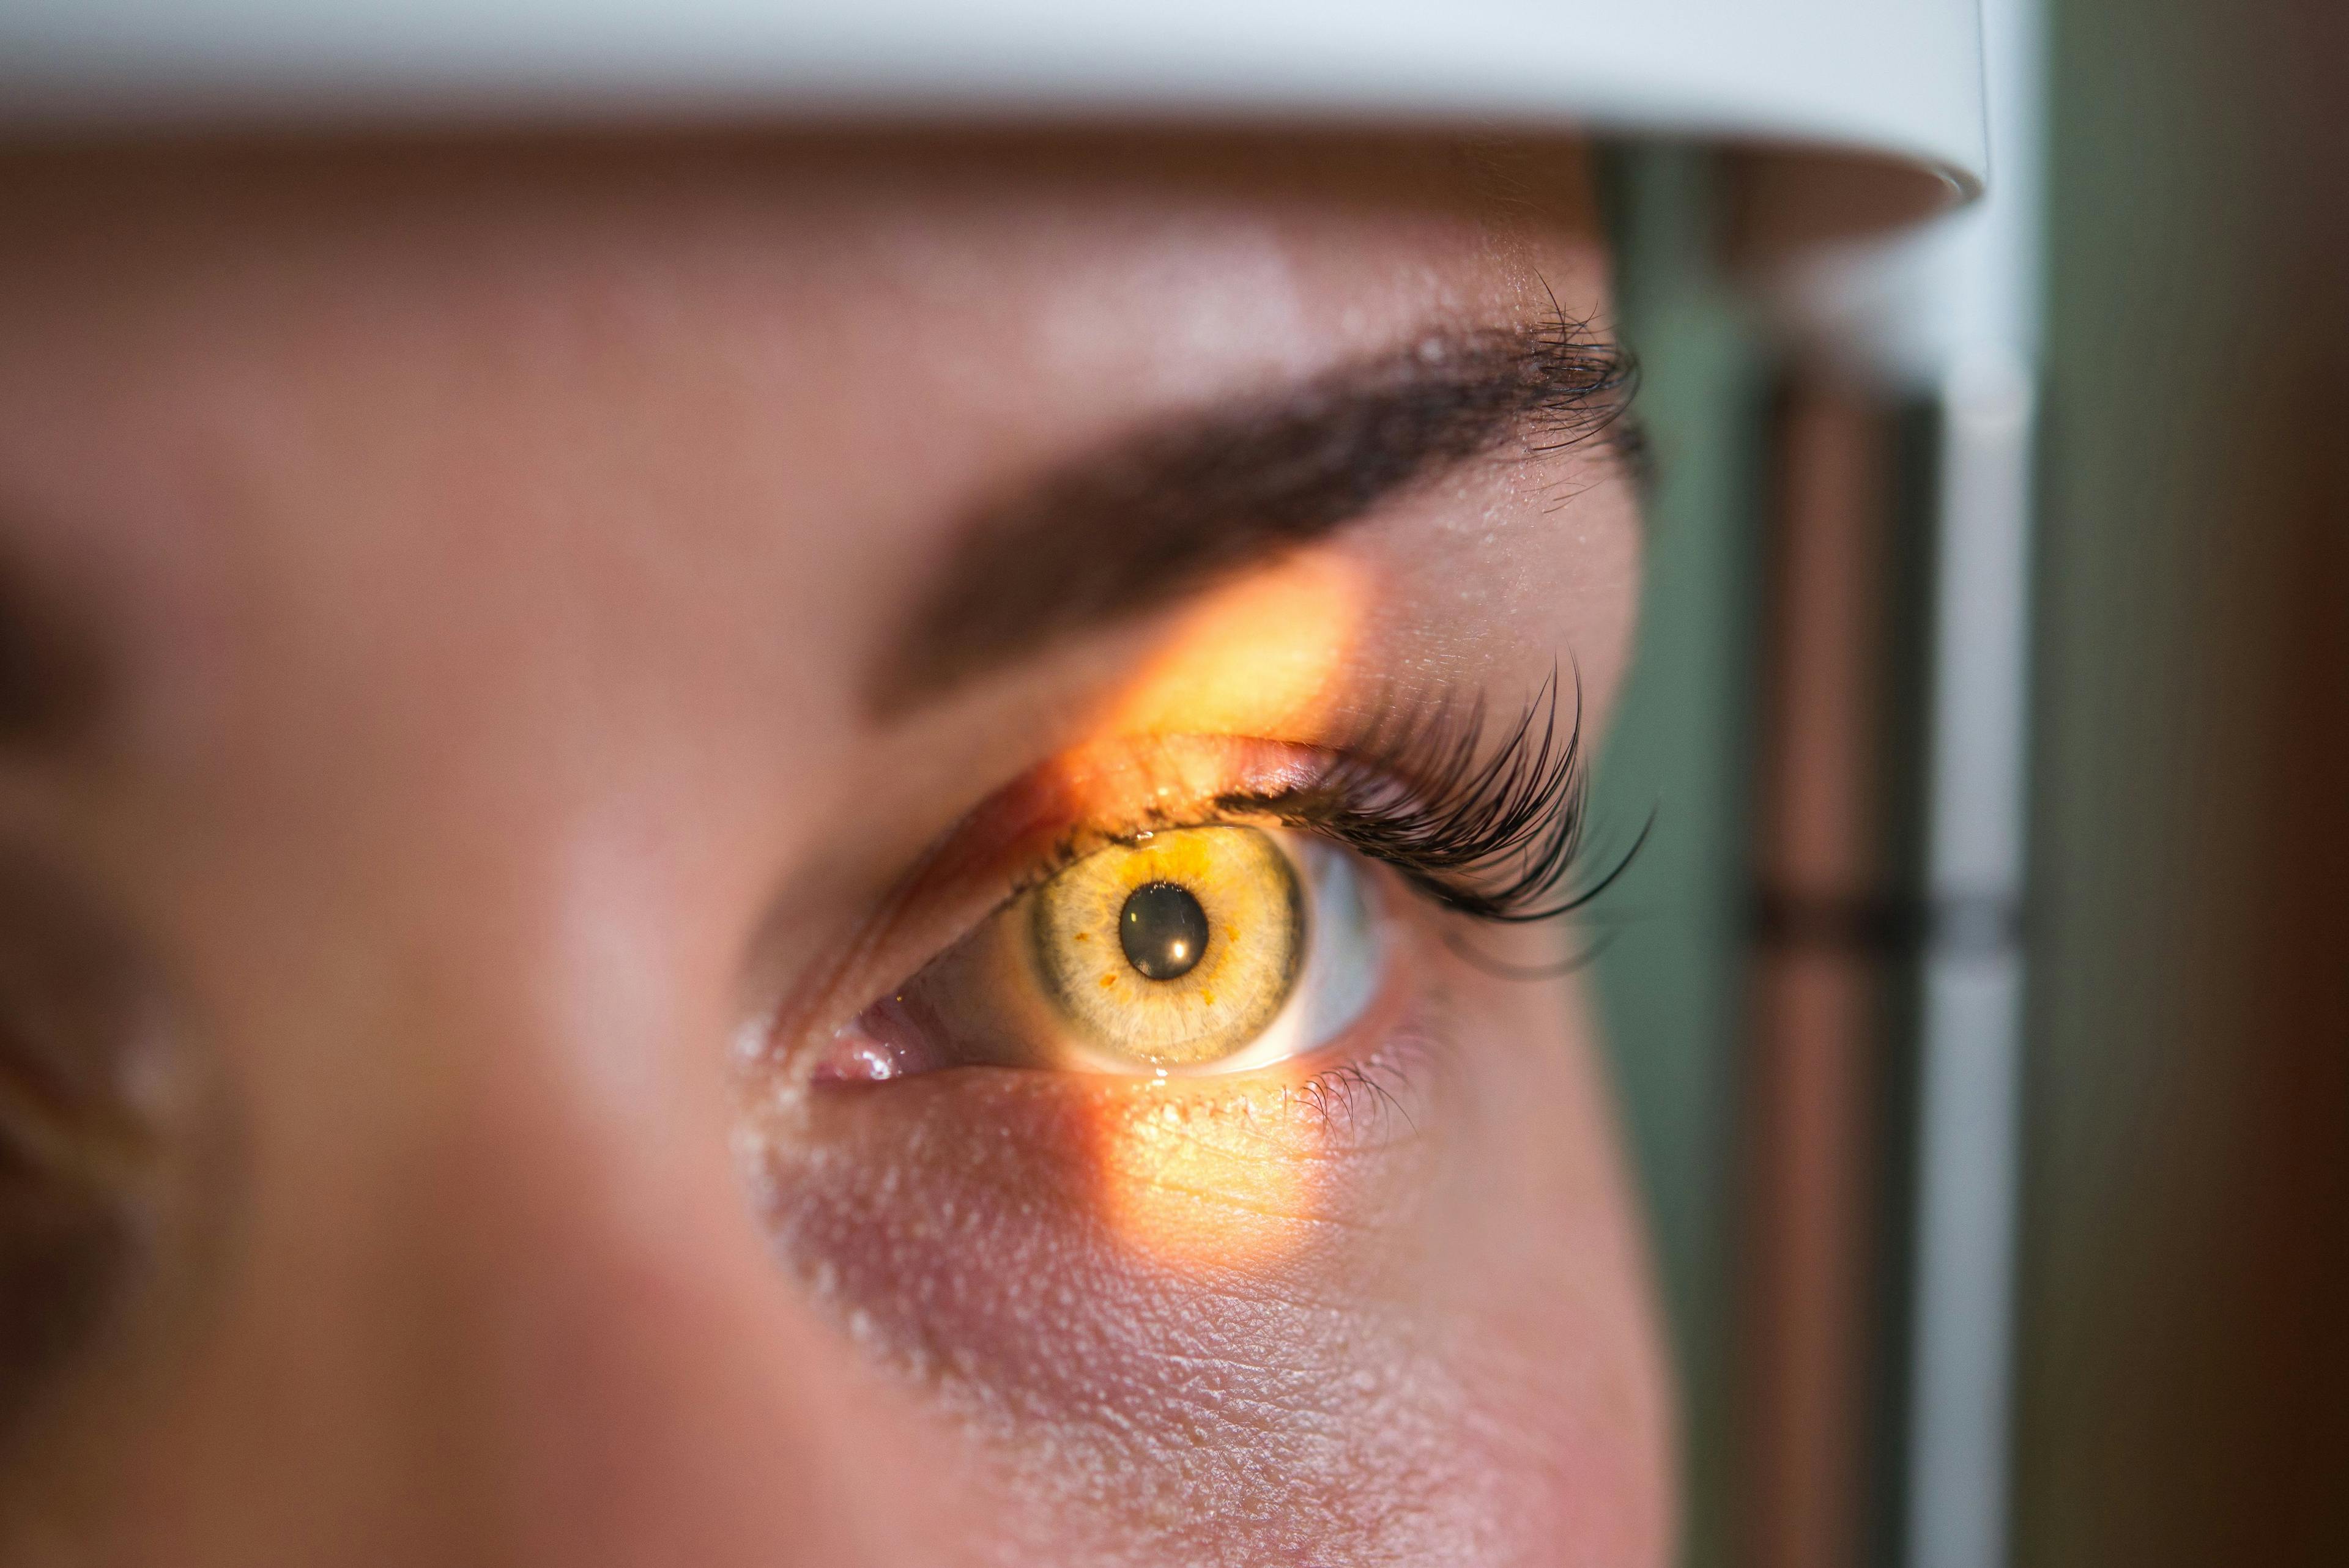 New therapies suggest potential alternatives to retinal biologics